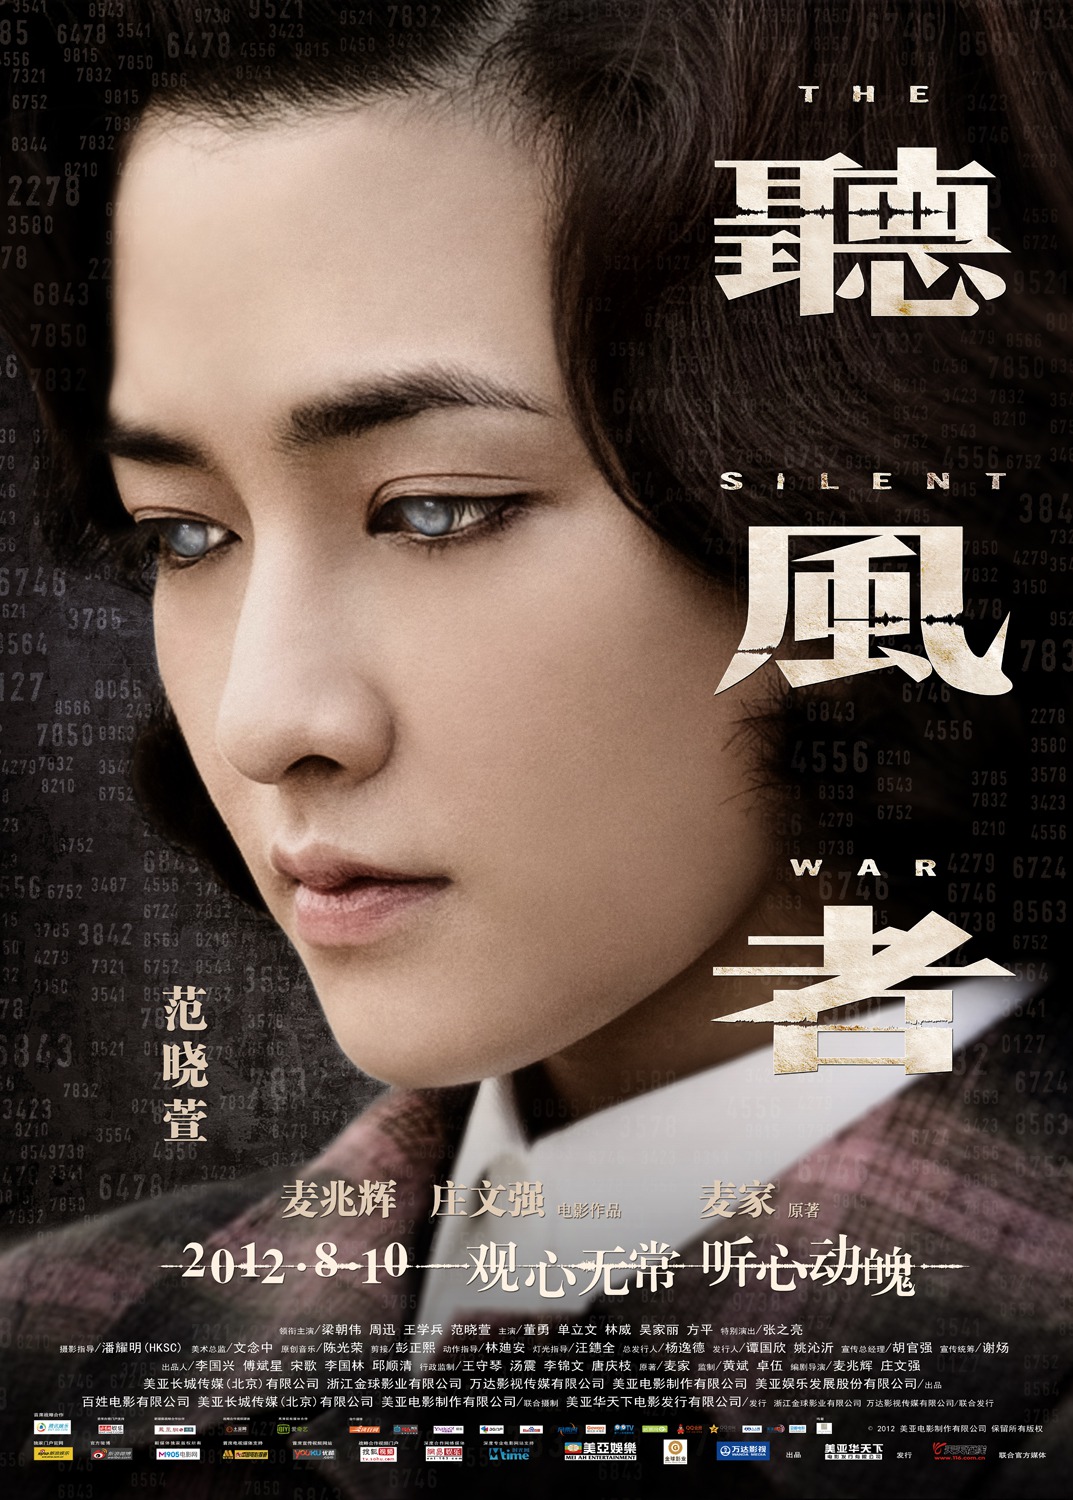 Extra Large Movie Poster Image for Ting feng zhe (#6 of 9)